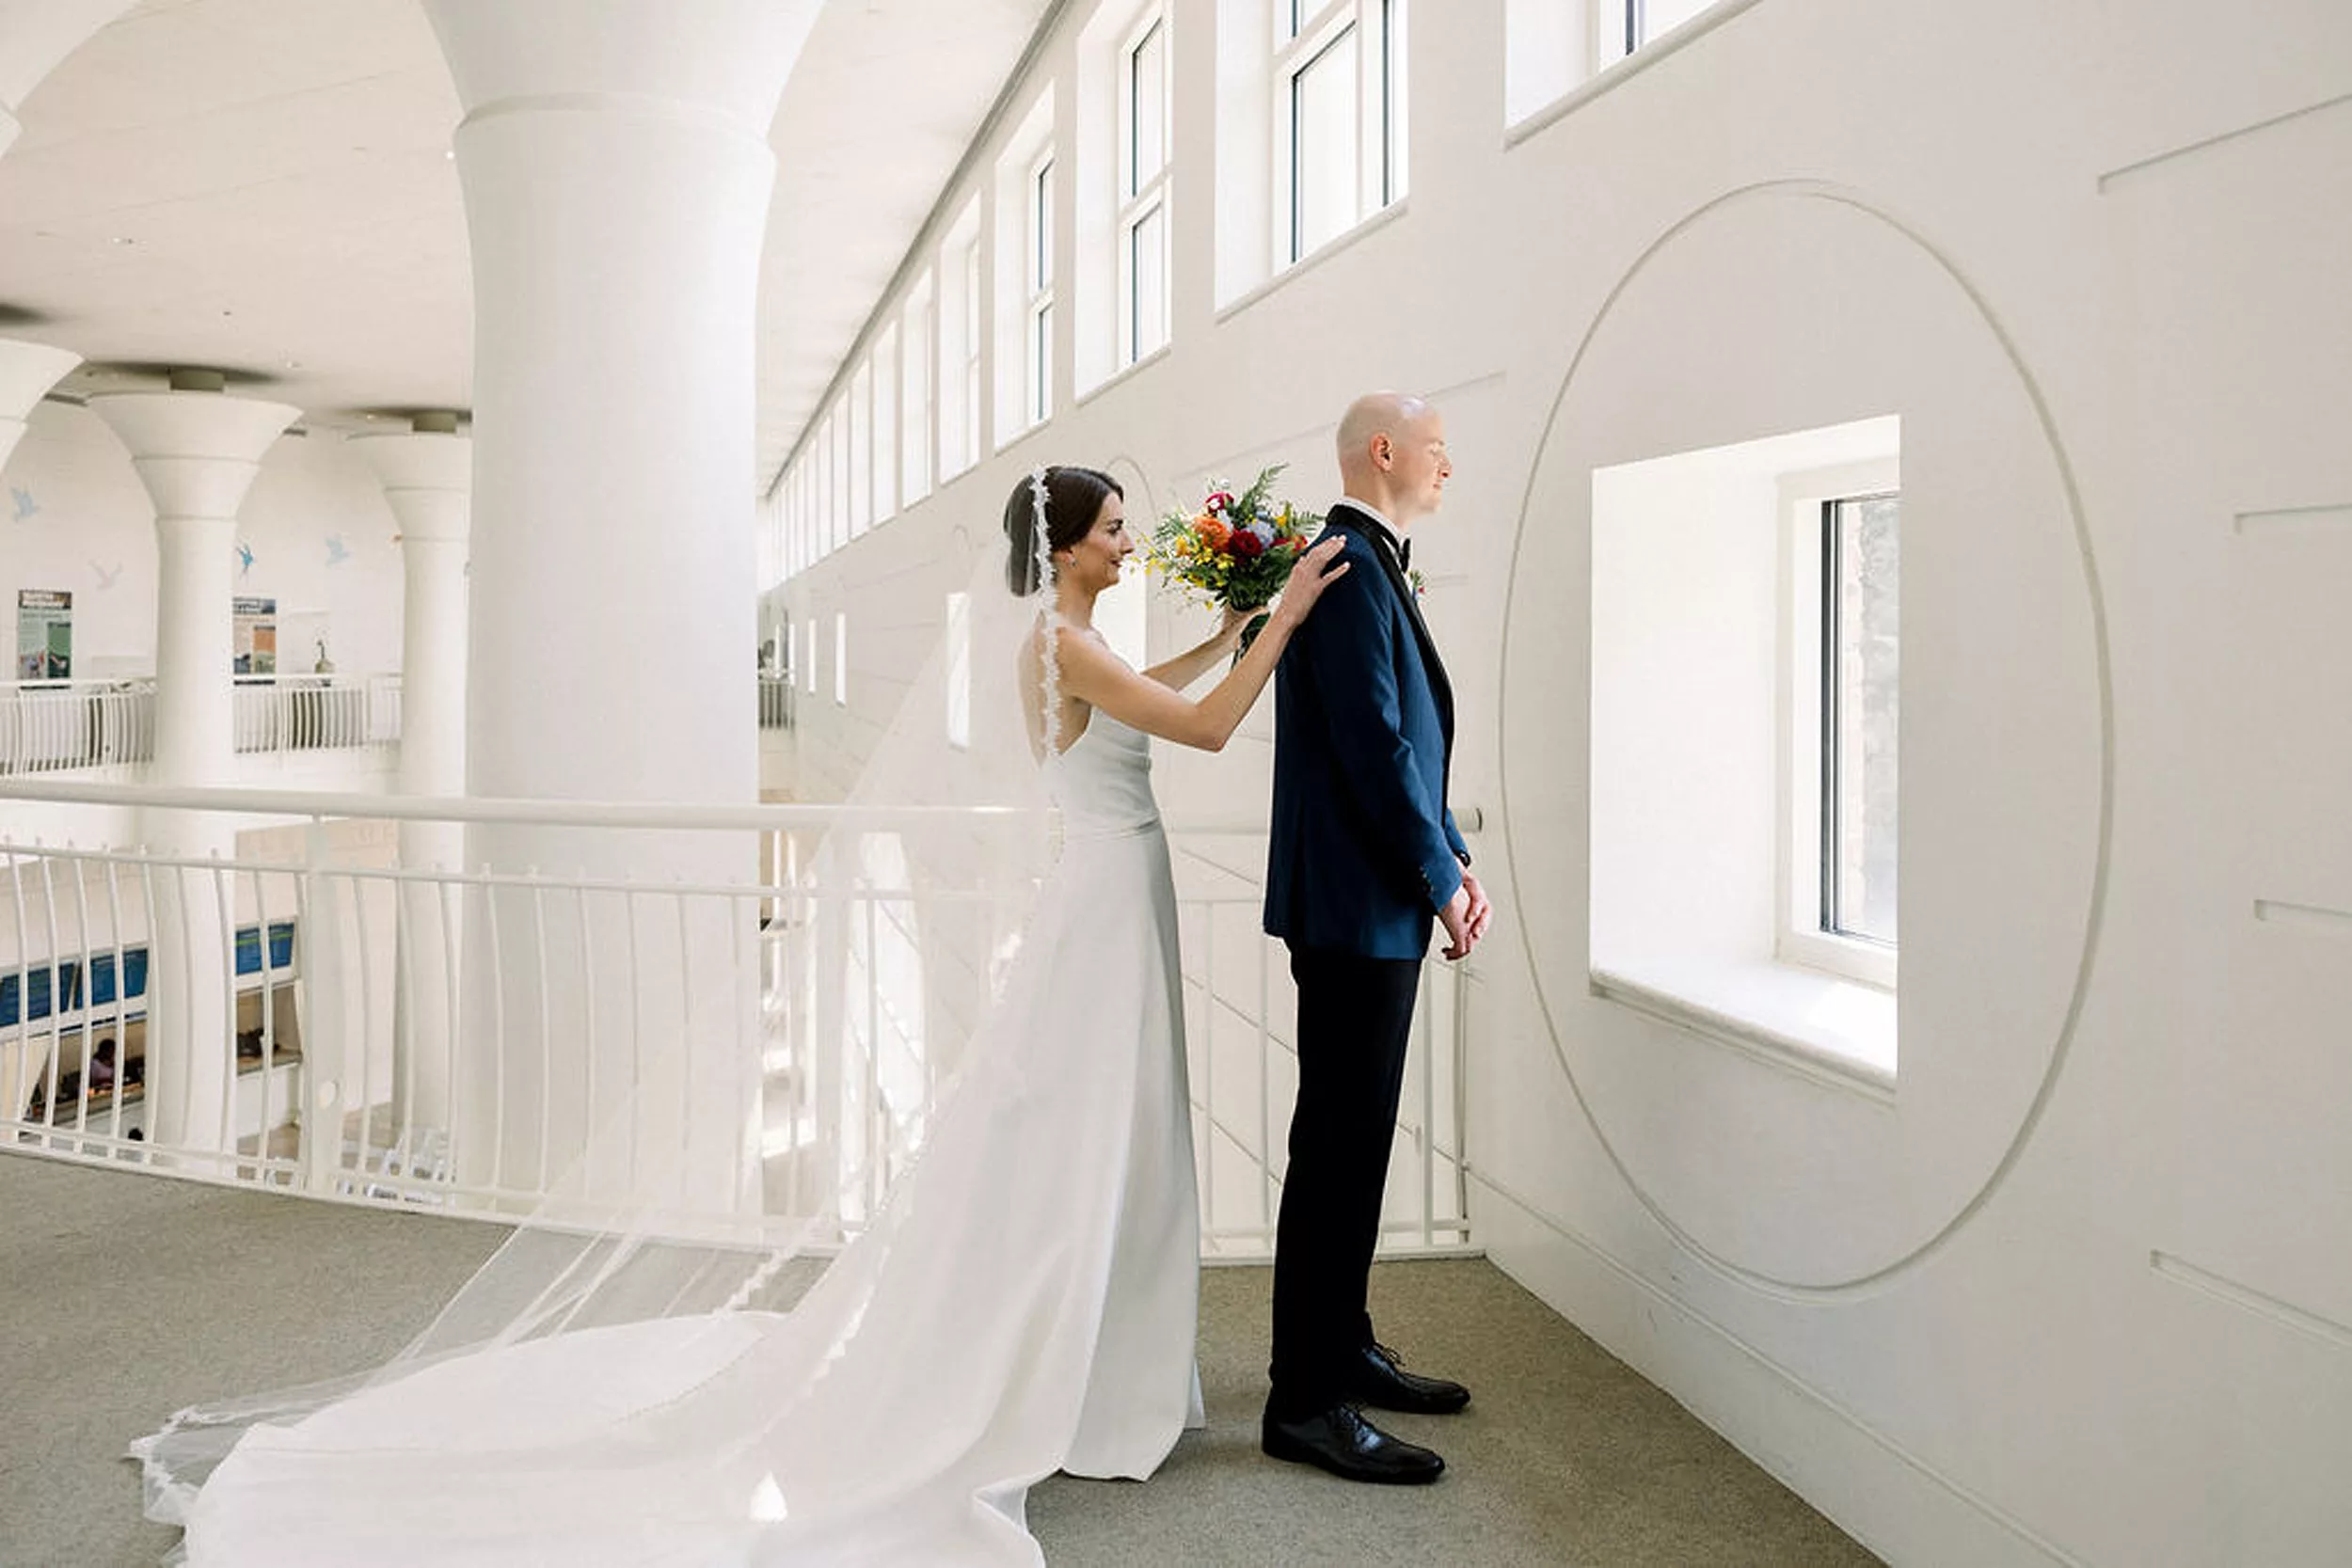 A bride taps the shoulder of her groom for a first look as he looks out a window with his back turned to her